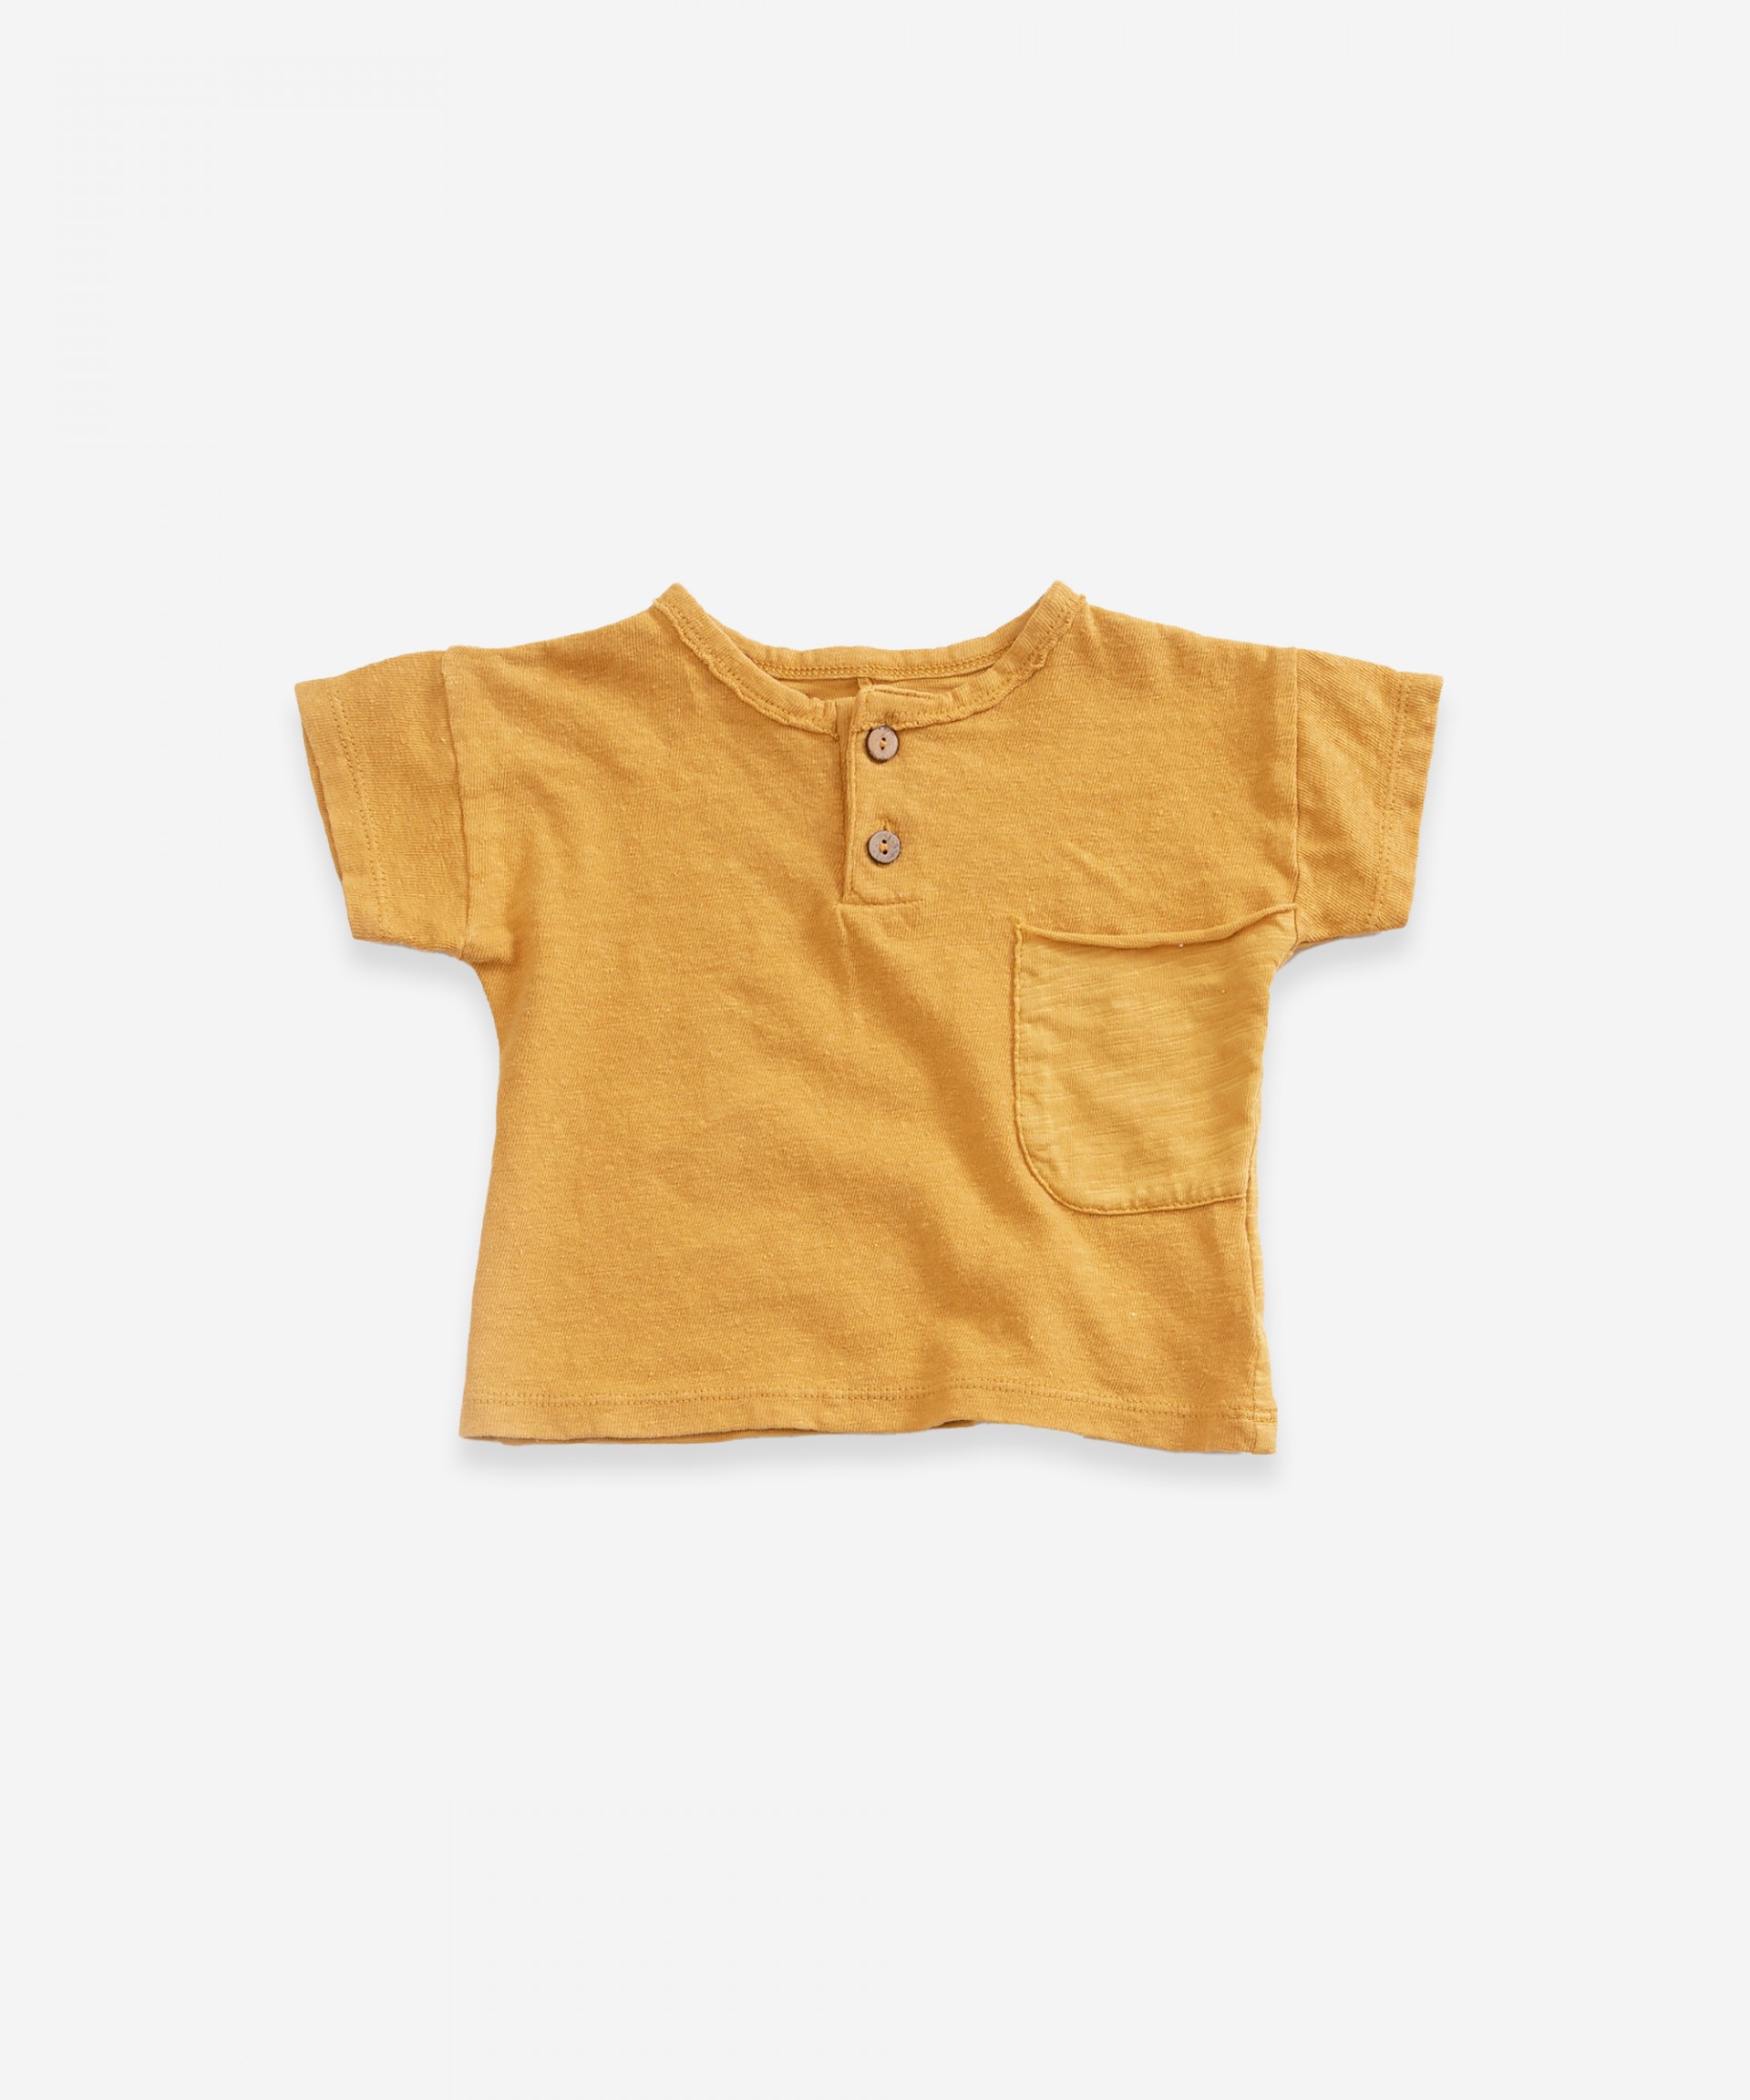 T-shirt in cotton-linen with two buttons | Weaving